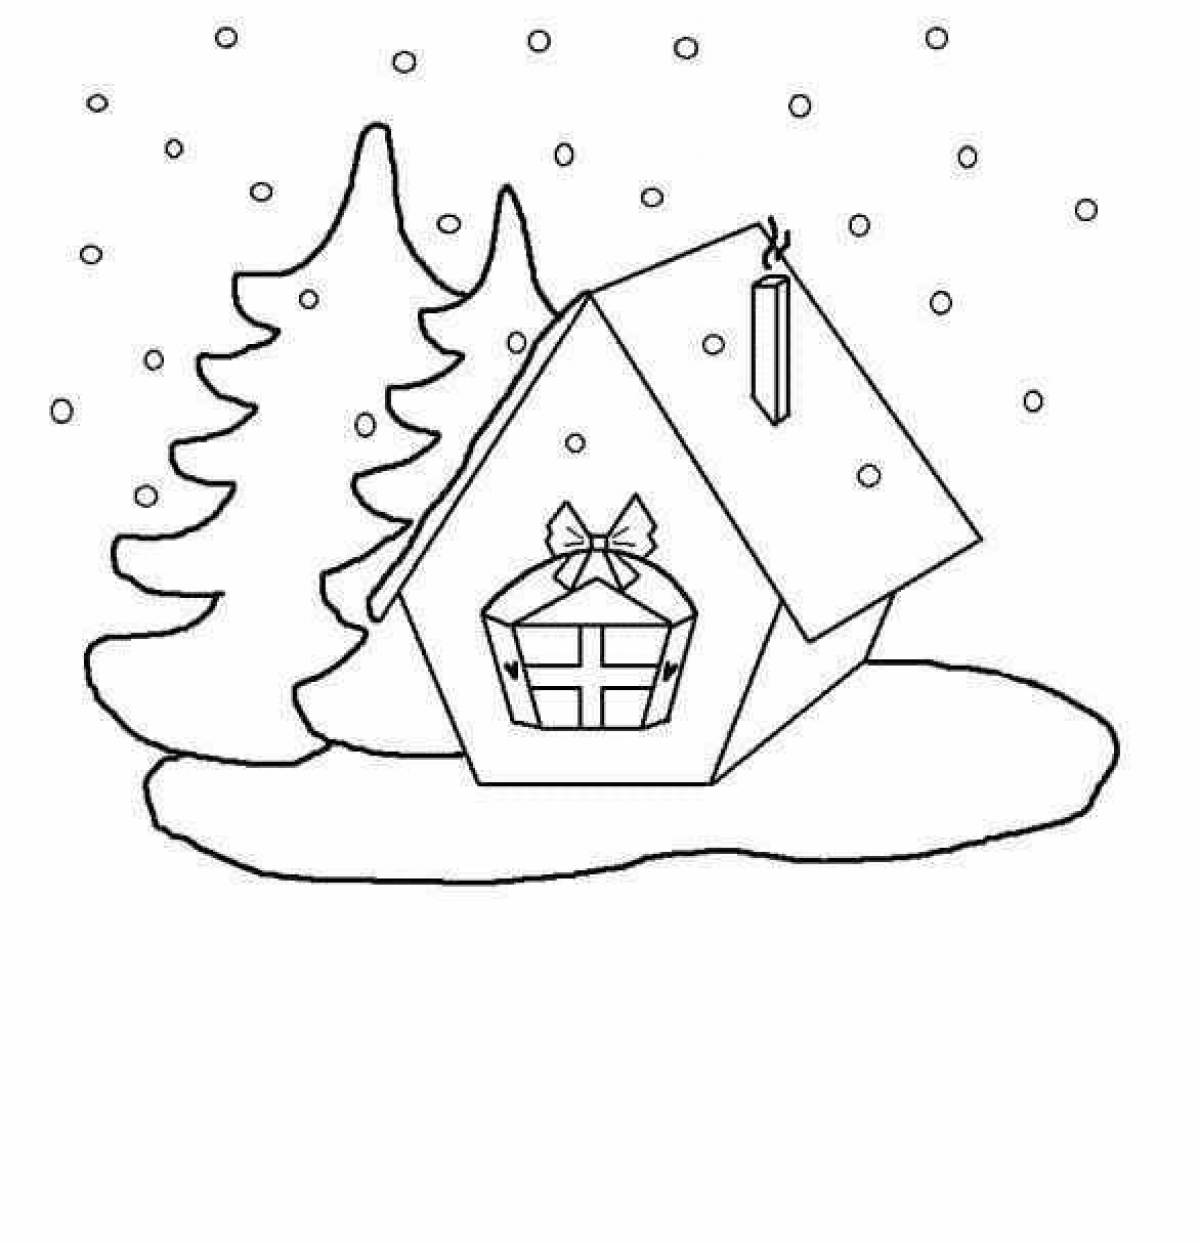 Colouring awesome winter house